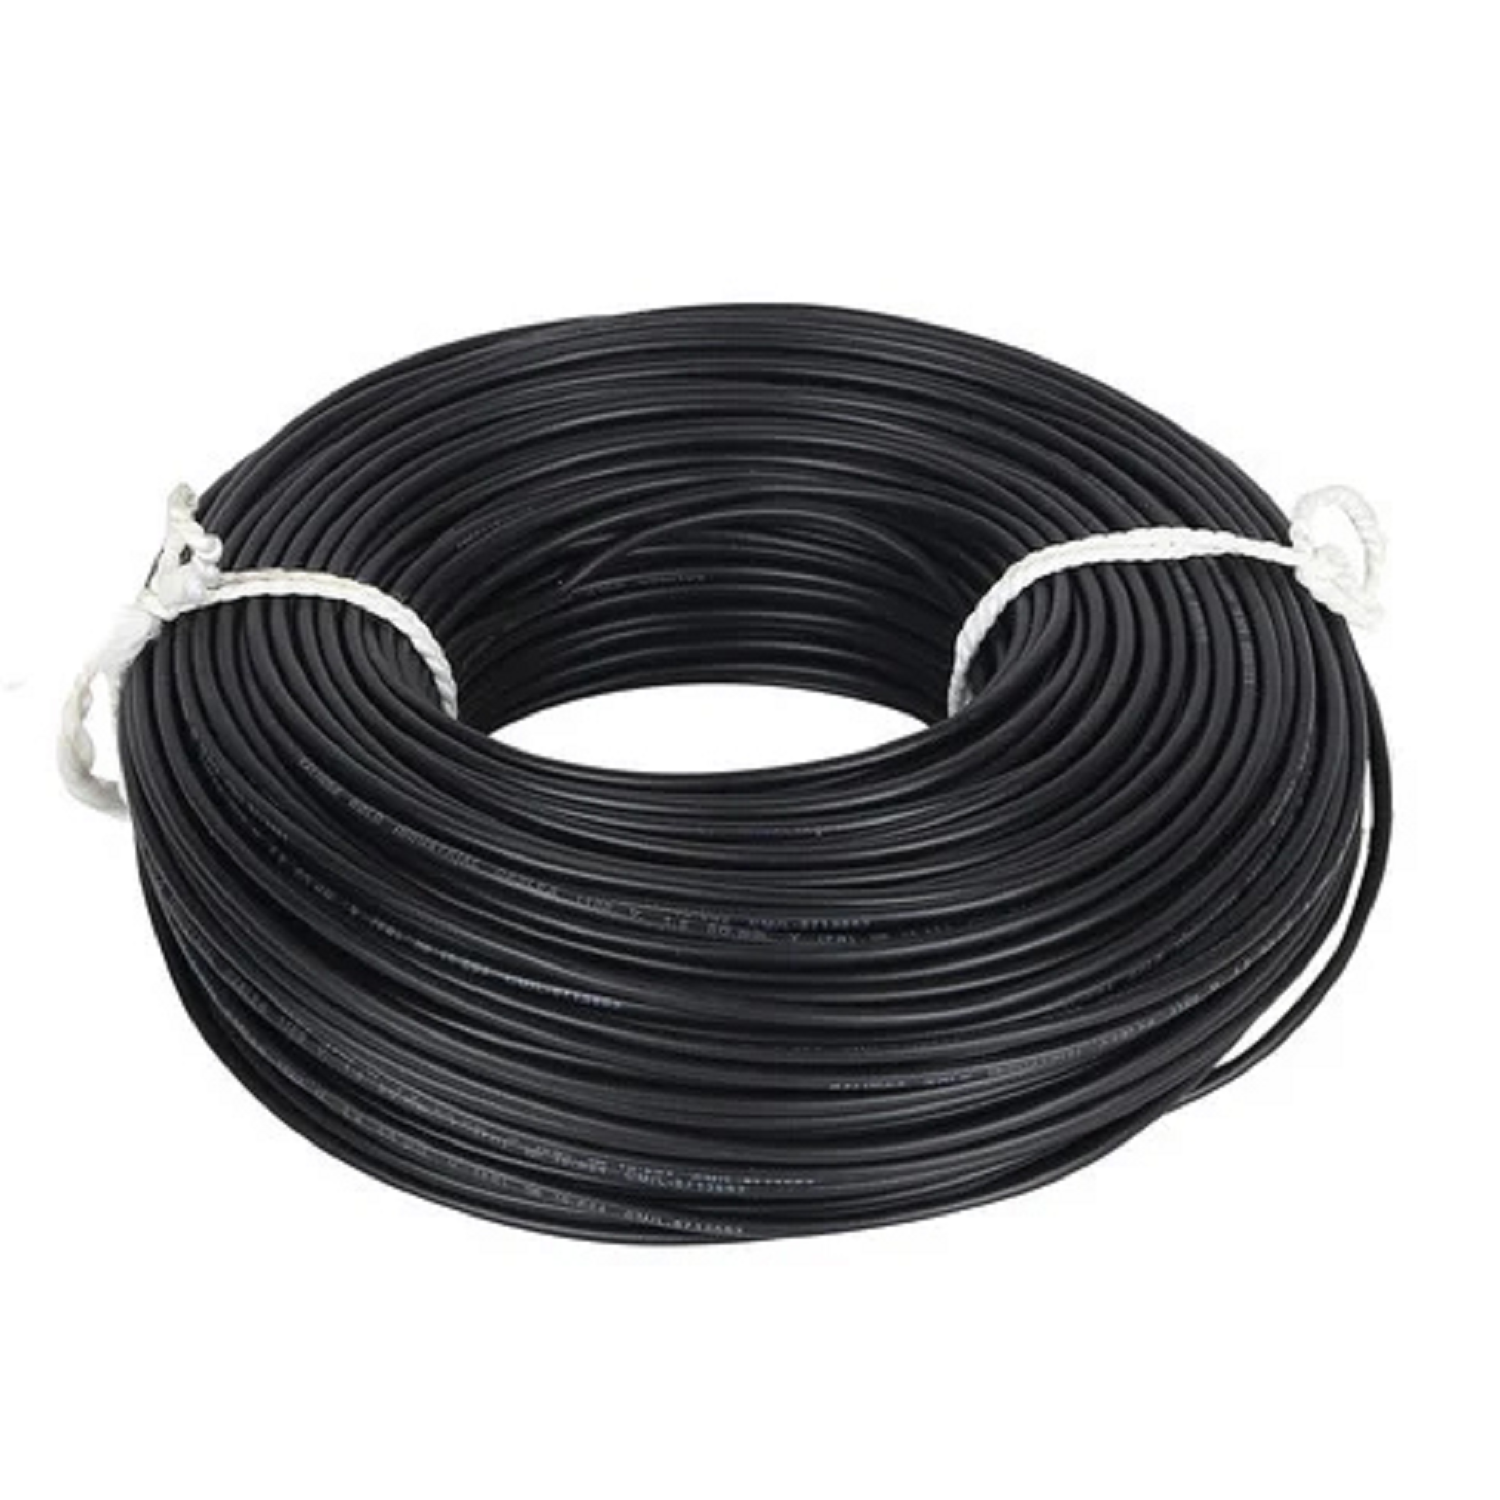 1.5 Sqmm KEI FR Single Core Copper Wire (180 Mtr) With PVC Insulated for Domestic 38 Industrial Uses